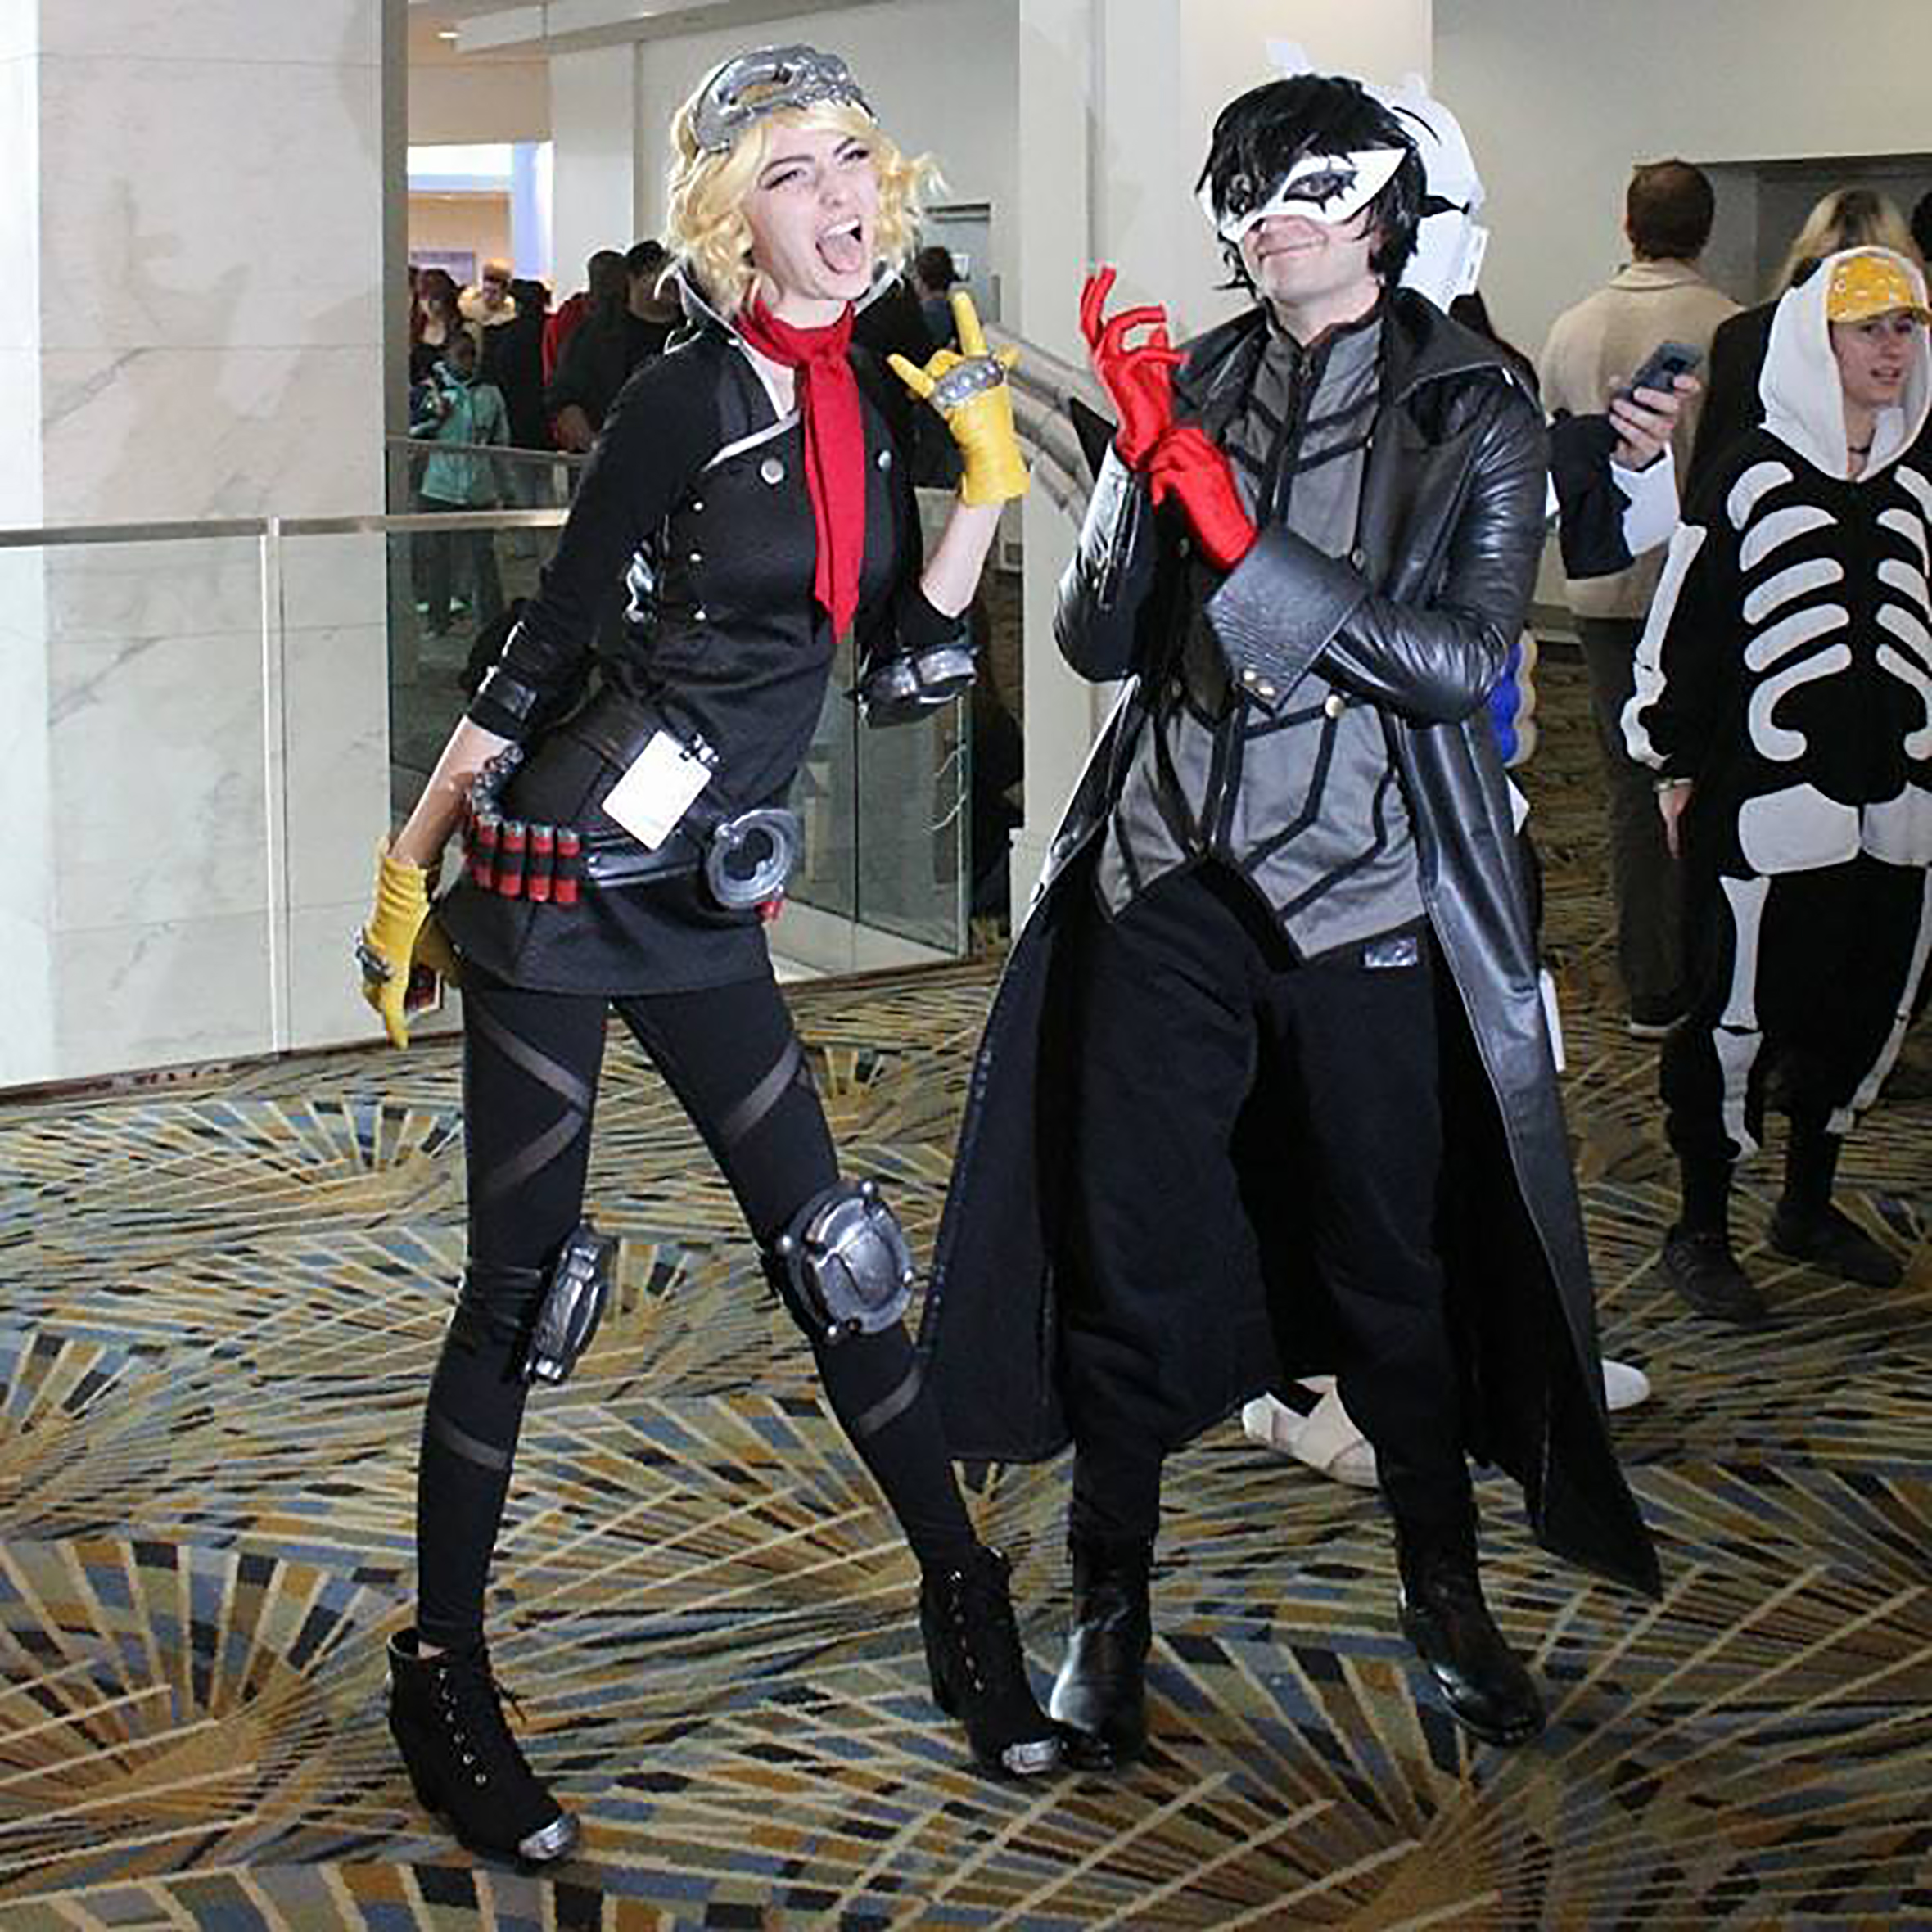 Participants of cosplay at 2017 Youmacon in Detroit